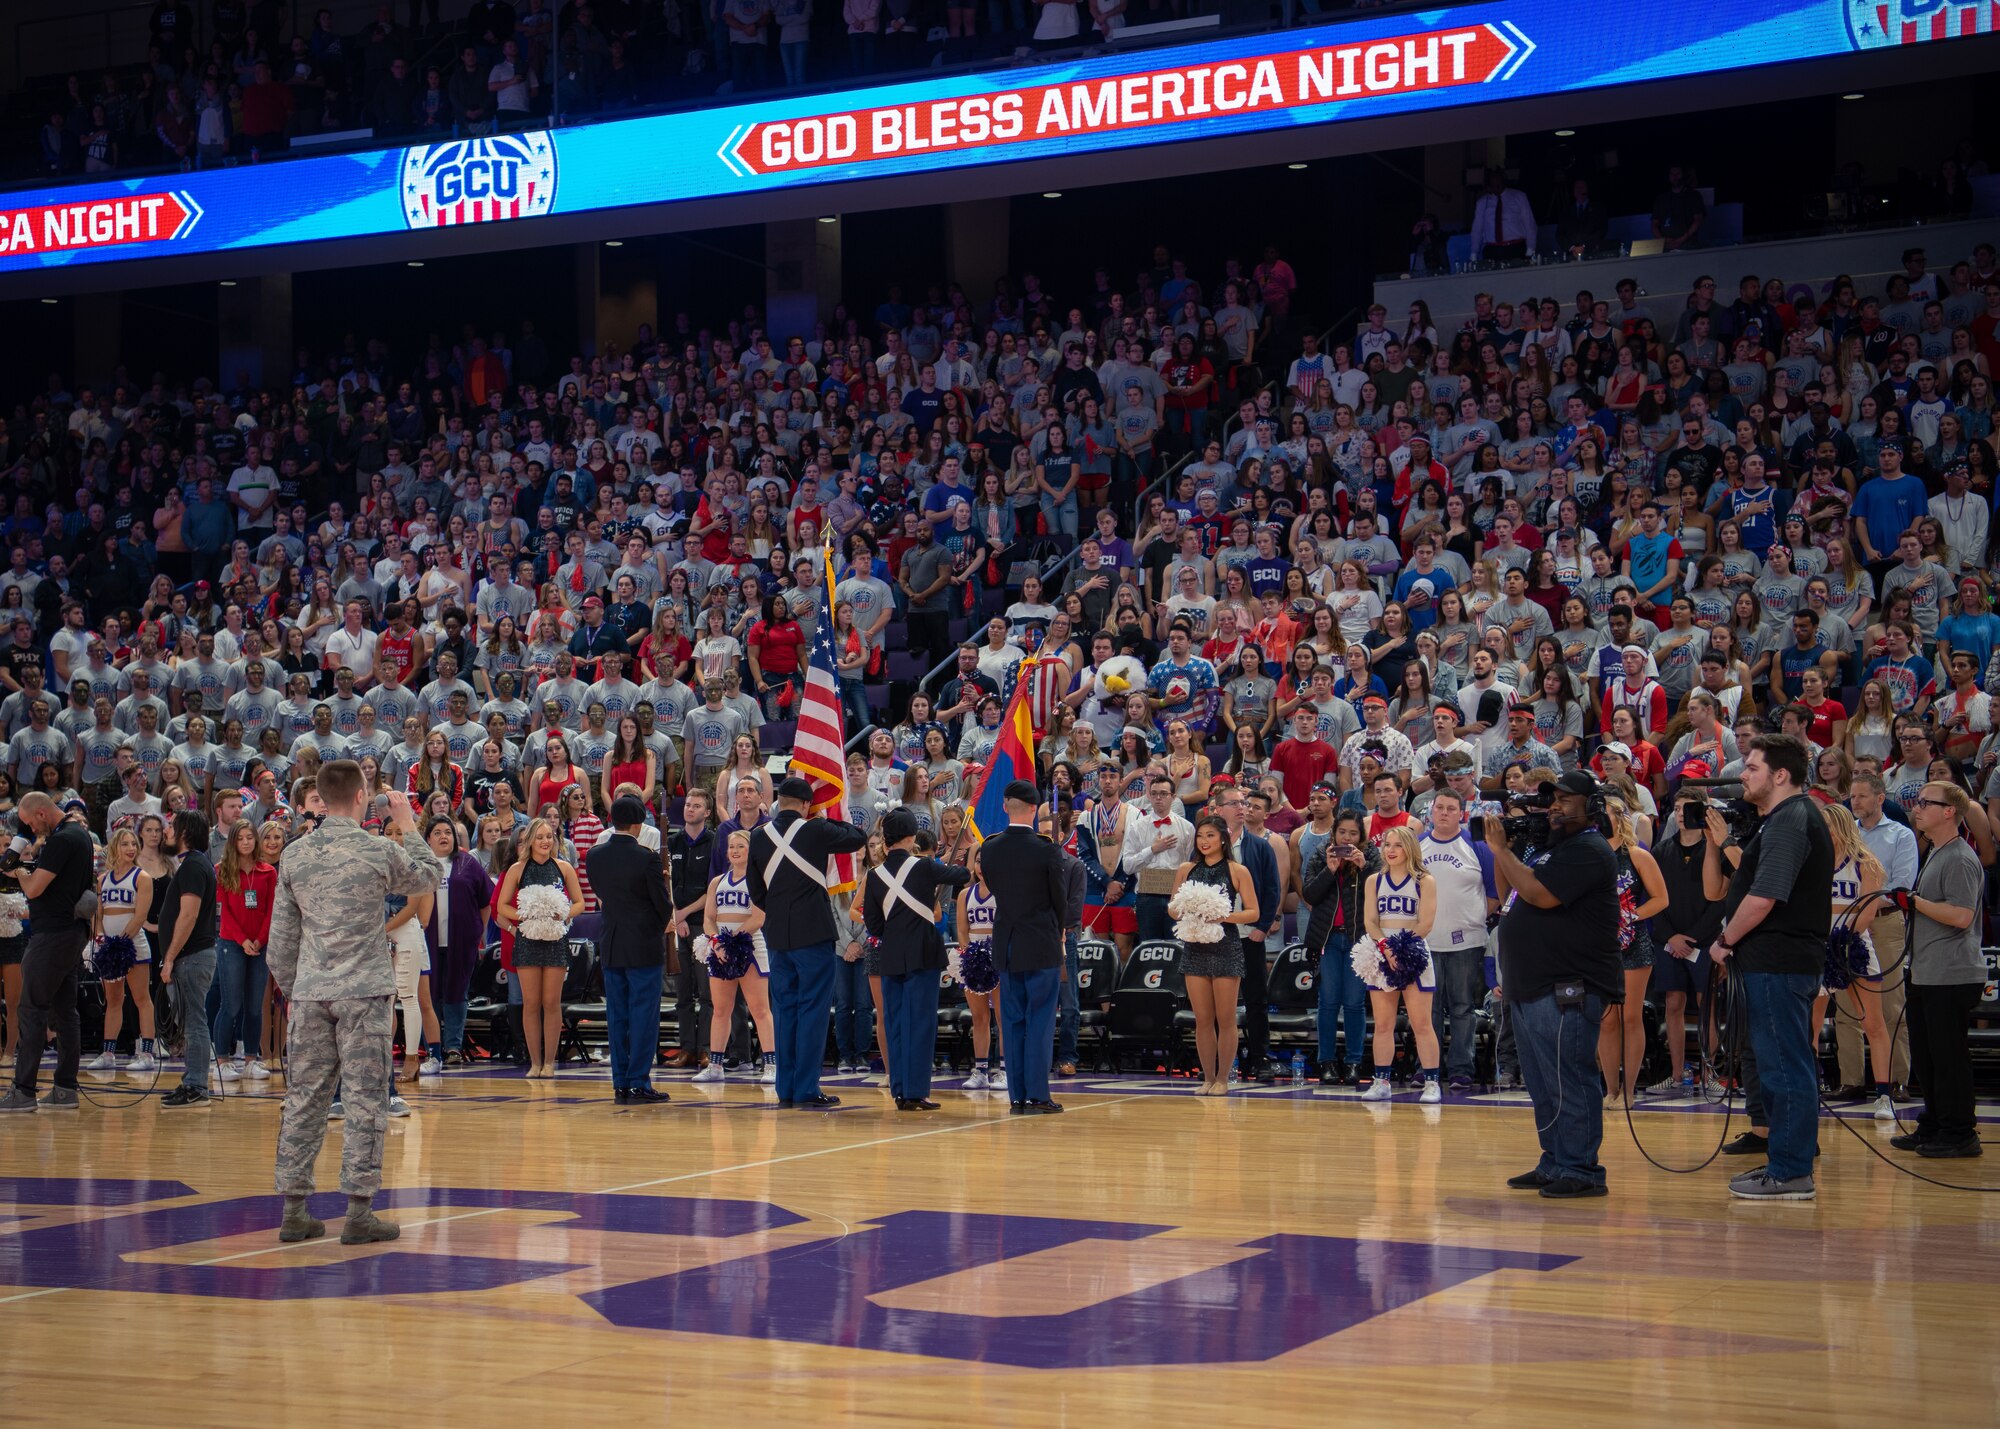 Senior Airman Timothy Orr, 944th Operations Group, Detachment 2 aviation resource manager, sings “God Bless America” before a Grand Canyon University basketball game, Feb. 27, 2019 in Phoenix, Ariz.